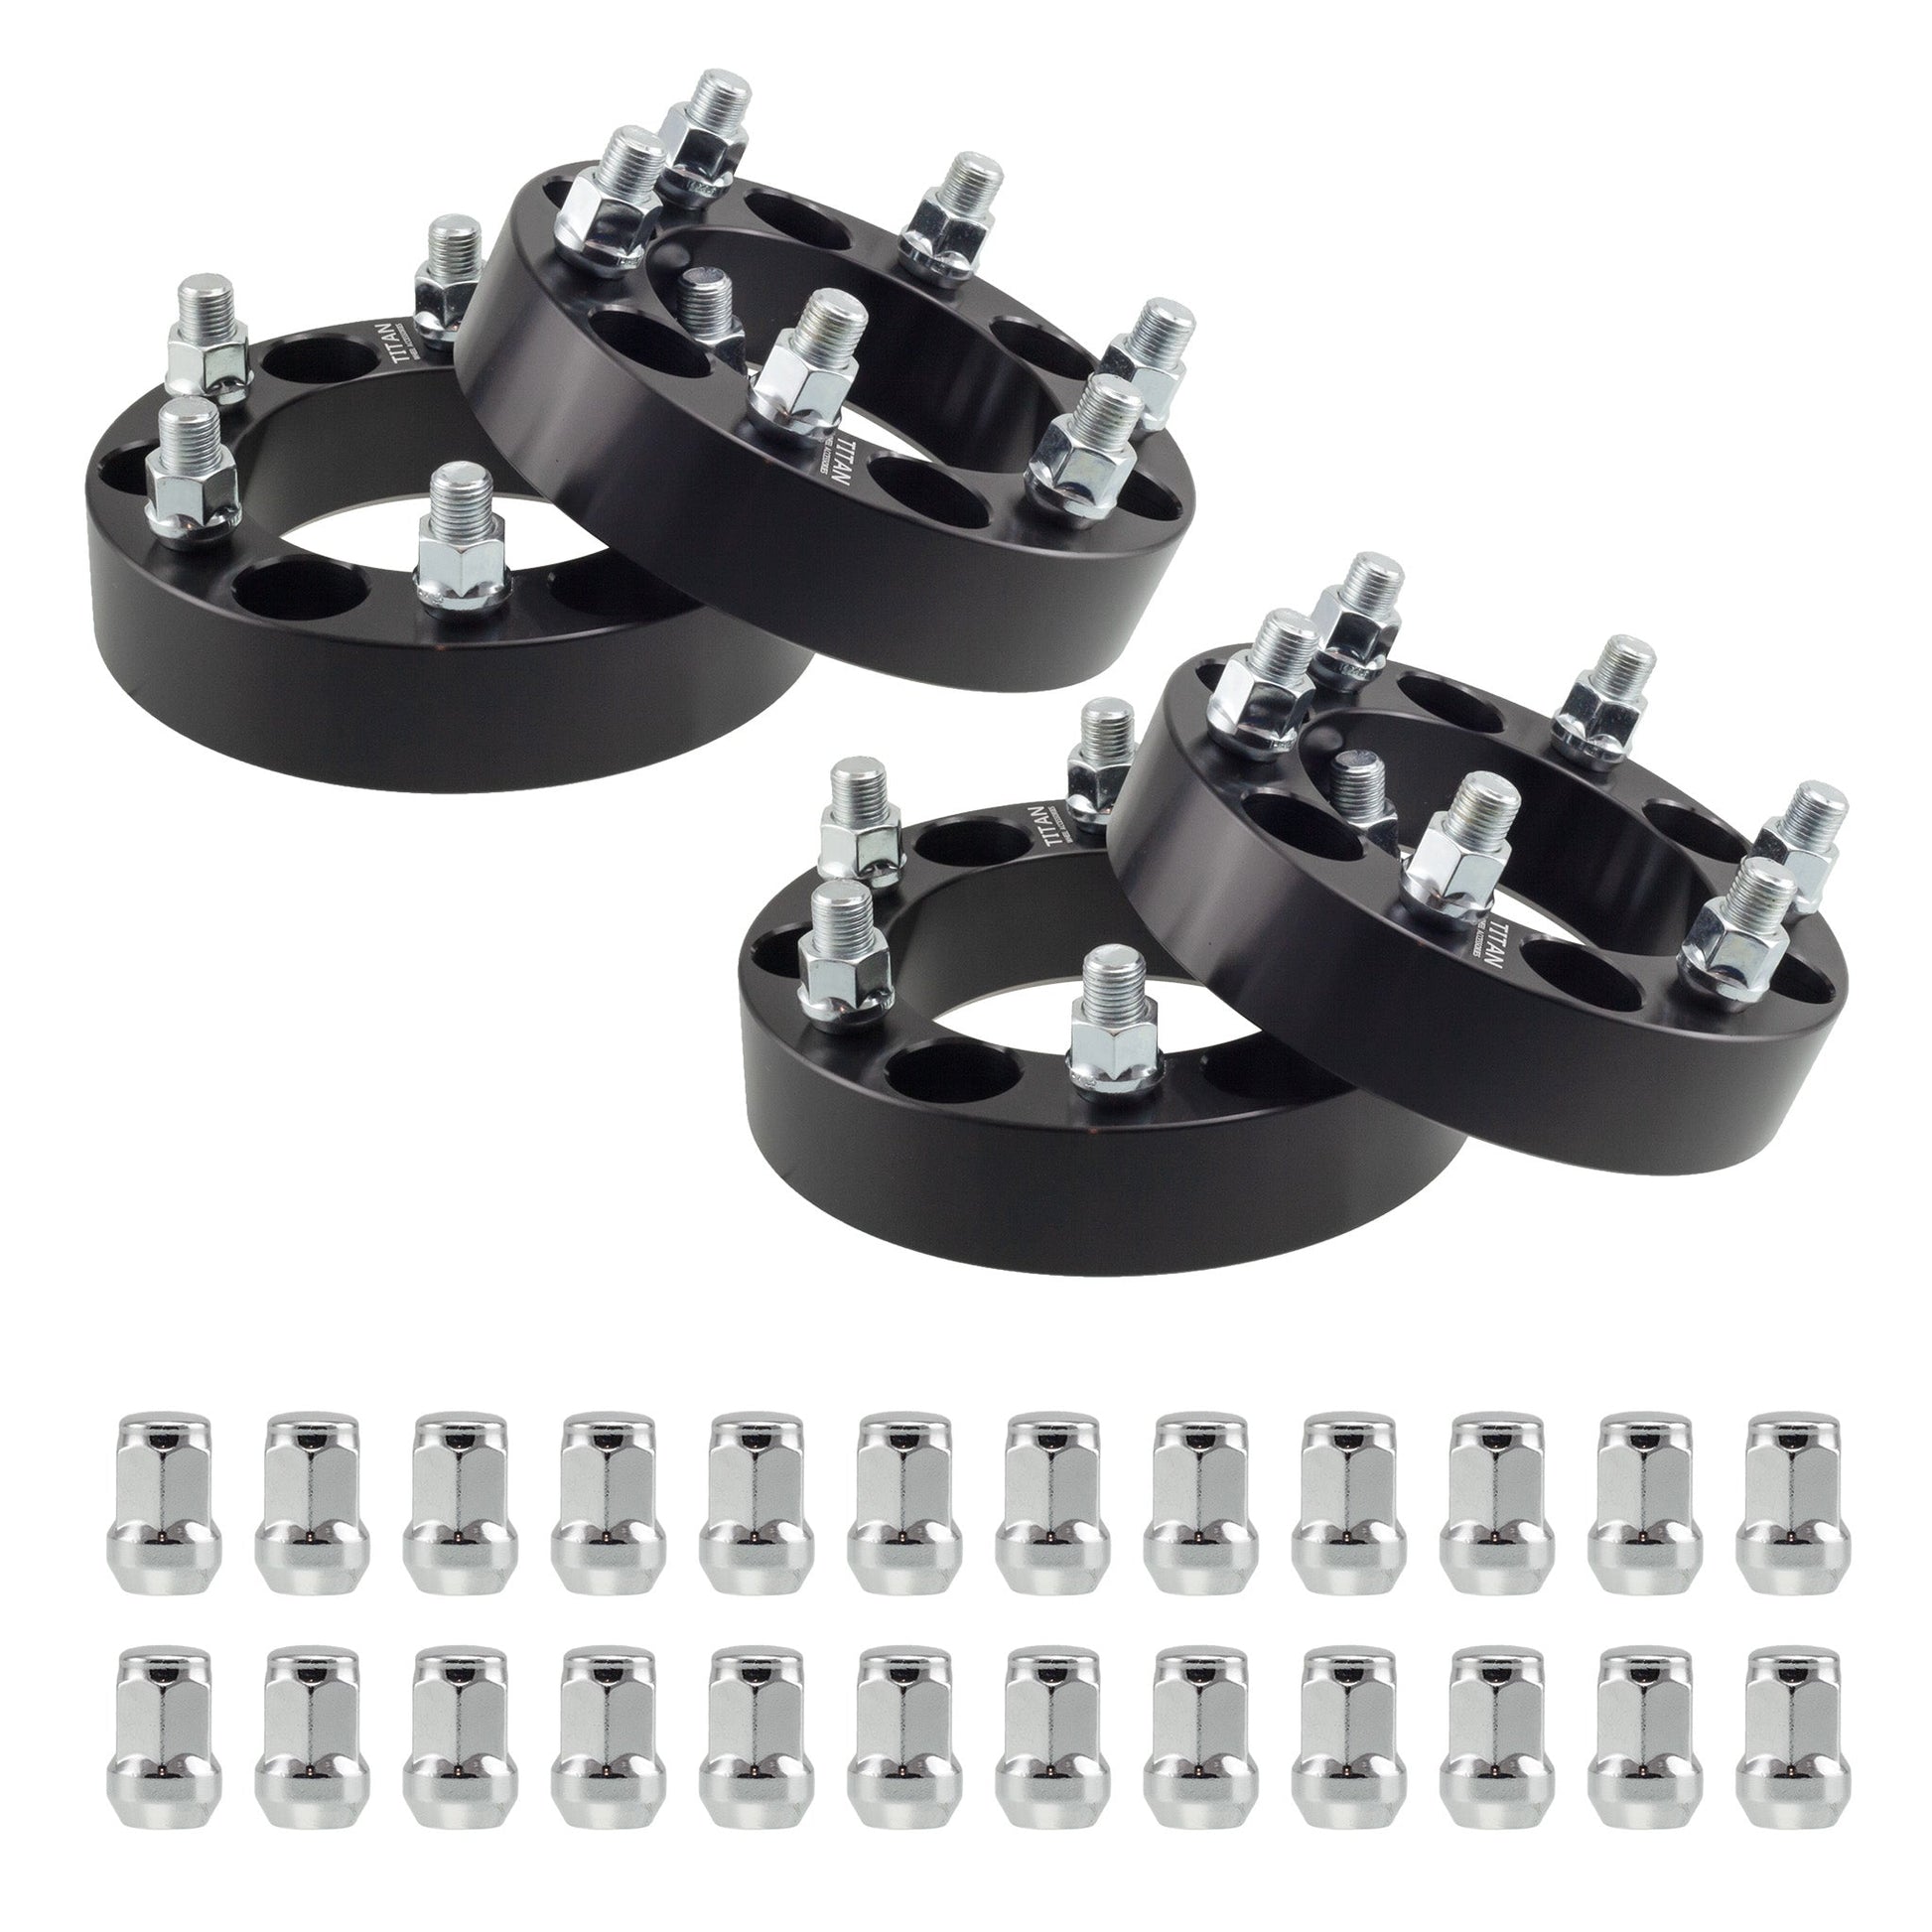 1.5" (38mm) Titan Wheel Spacers for Chevy Colorado GMC Canyon | 6x120 | 66.9 Hubcentric |14x1.5 Studs | Titan Wheel Accessories